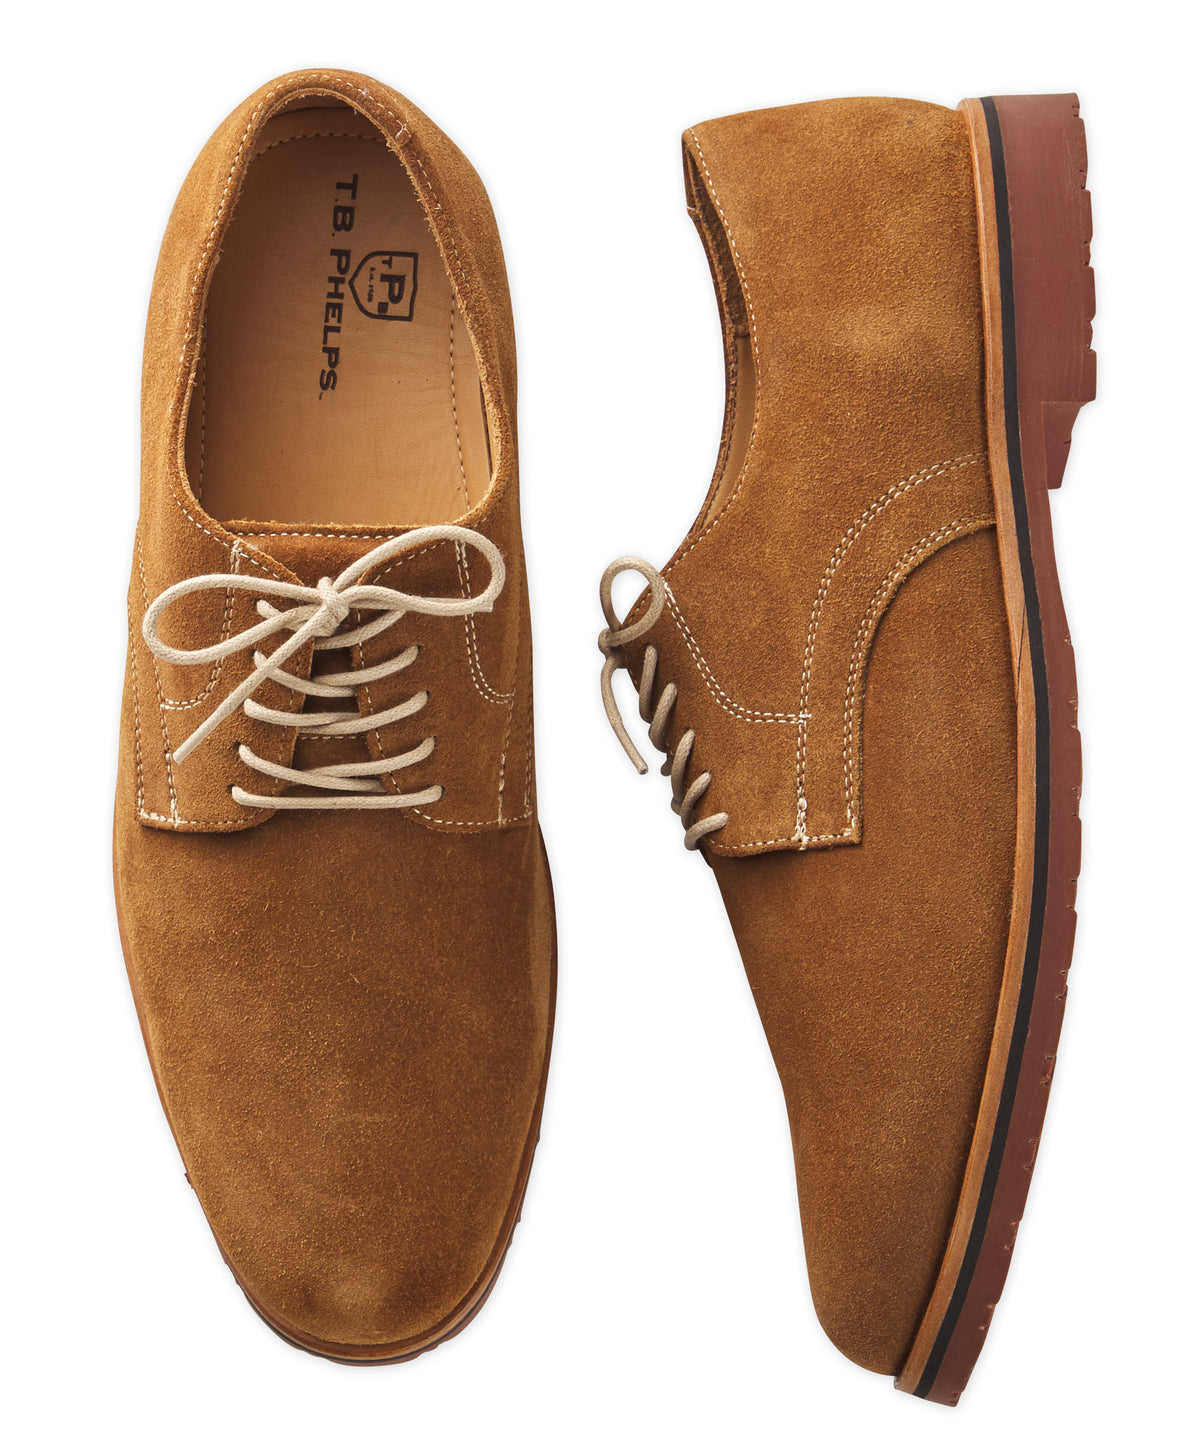 T.B. Phelps Spencer Dirty Buck Suede Sport Oxford